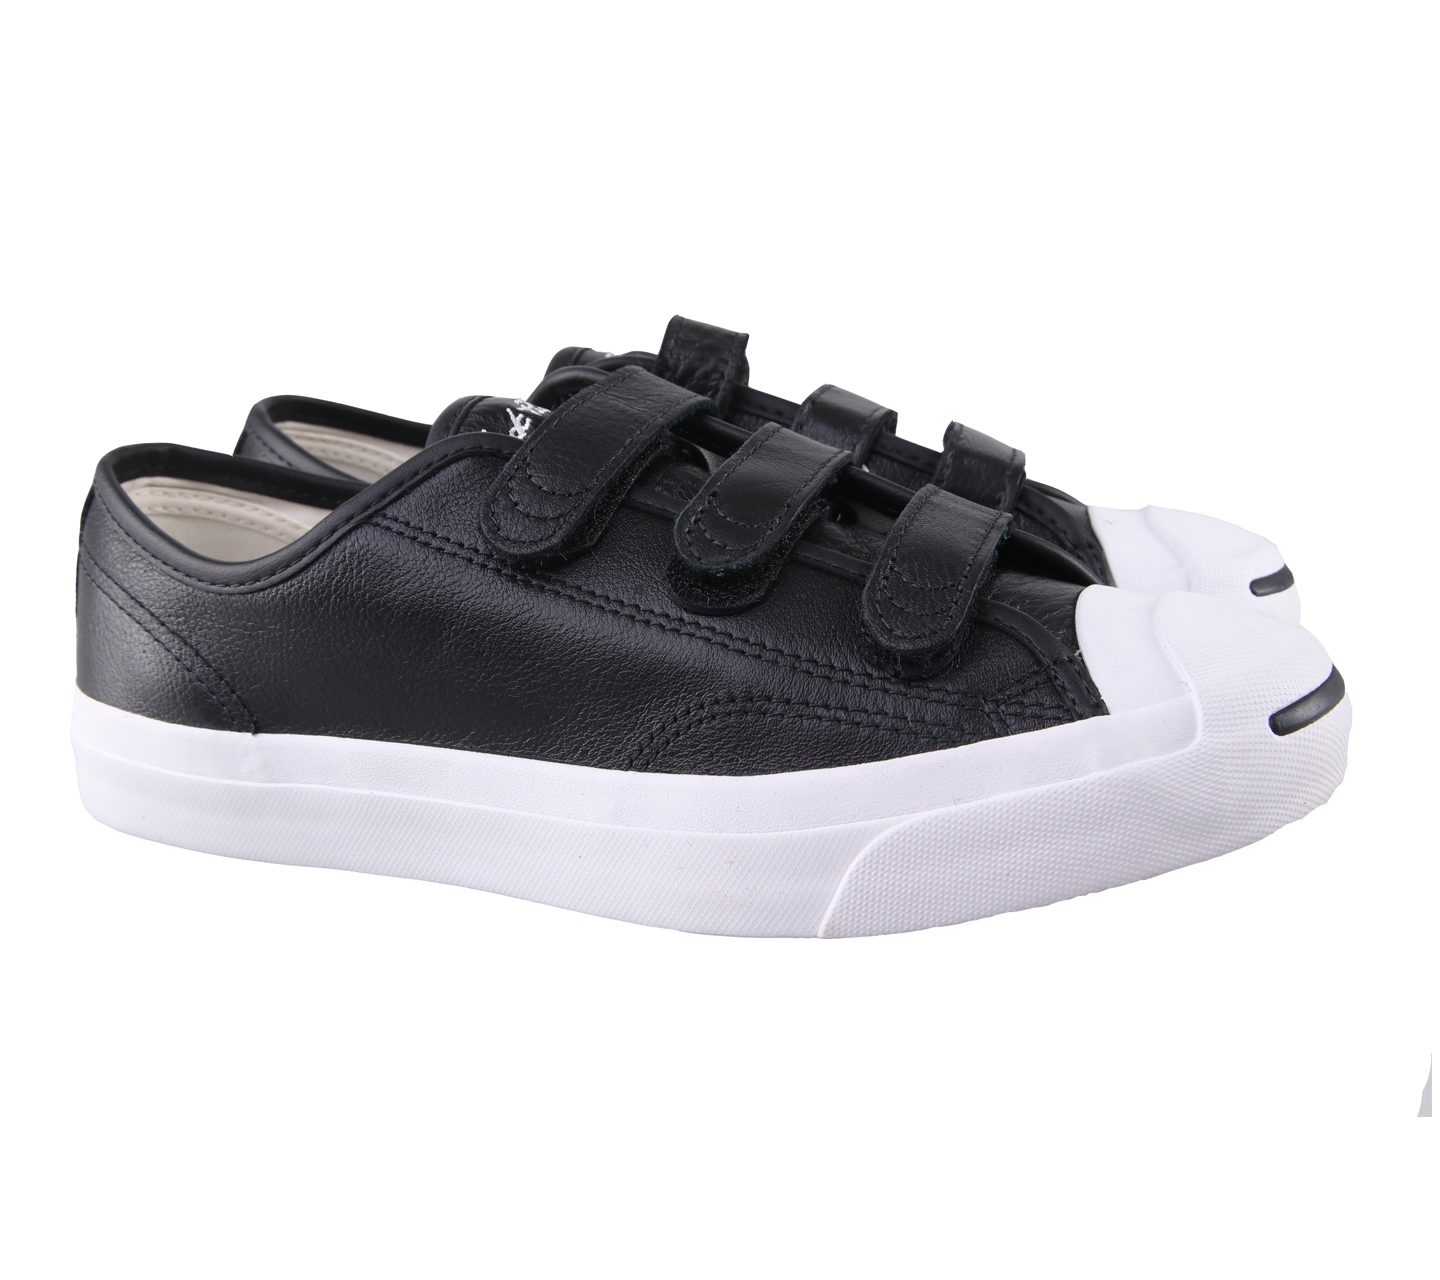 Converse Black And White Jack Purcell 3V Strap Sneakers